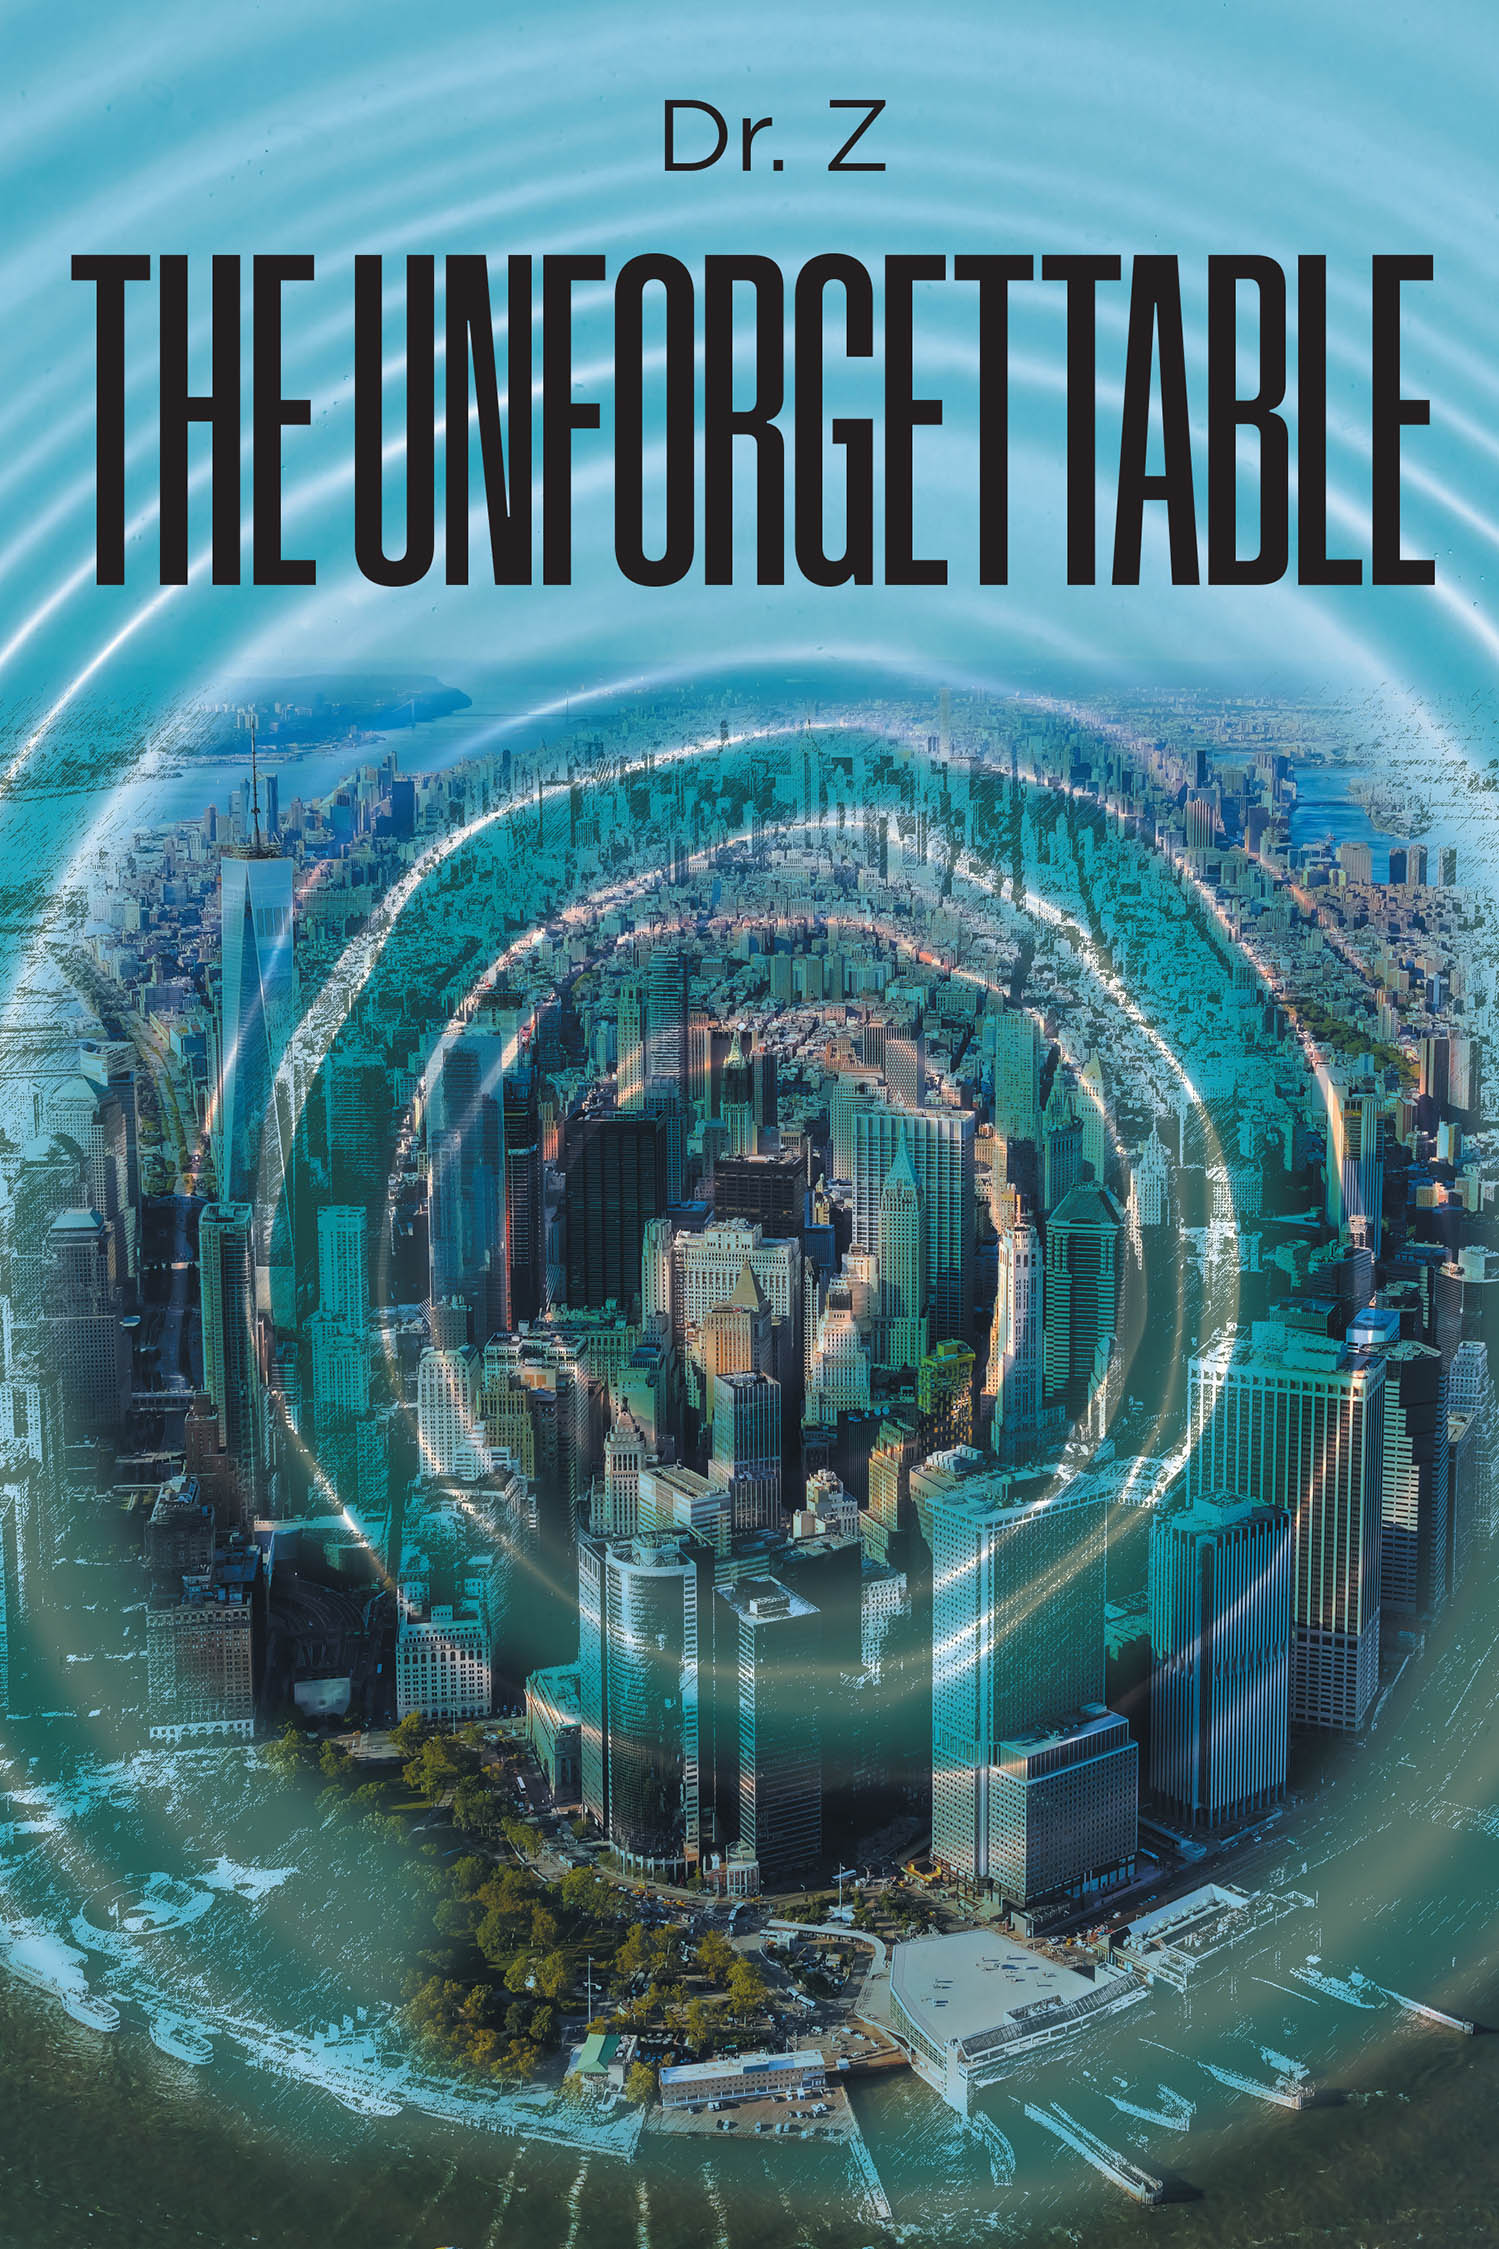 Author Dr. Z’s New Book "The Unforgettable" is the Captivating Tale of Protagonist Zvmcx, Who Must Overcome Countless Obstacles to Rise Above the Turn His Life Has Taken